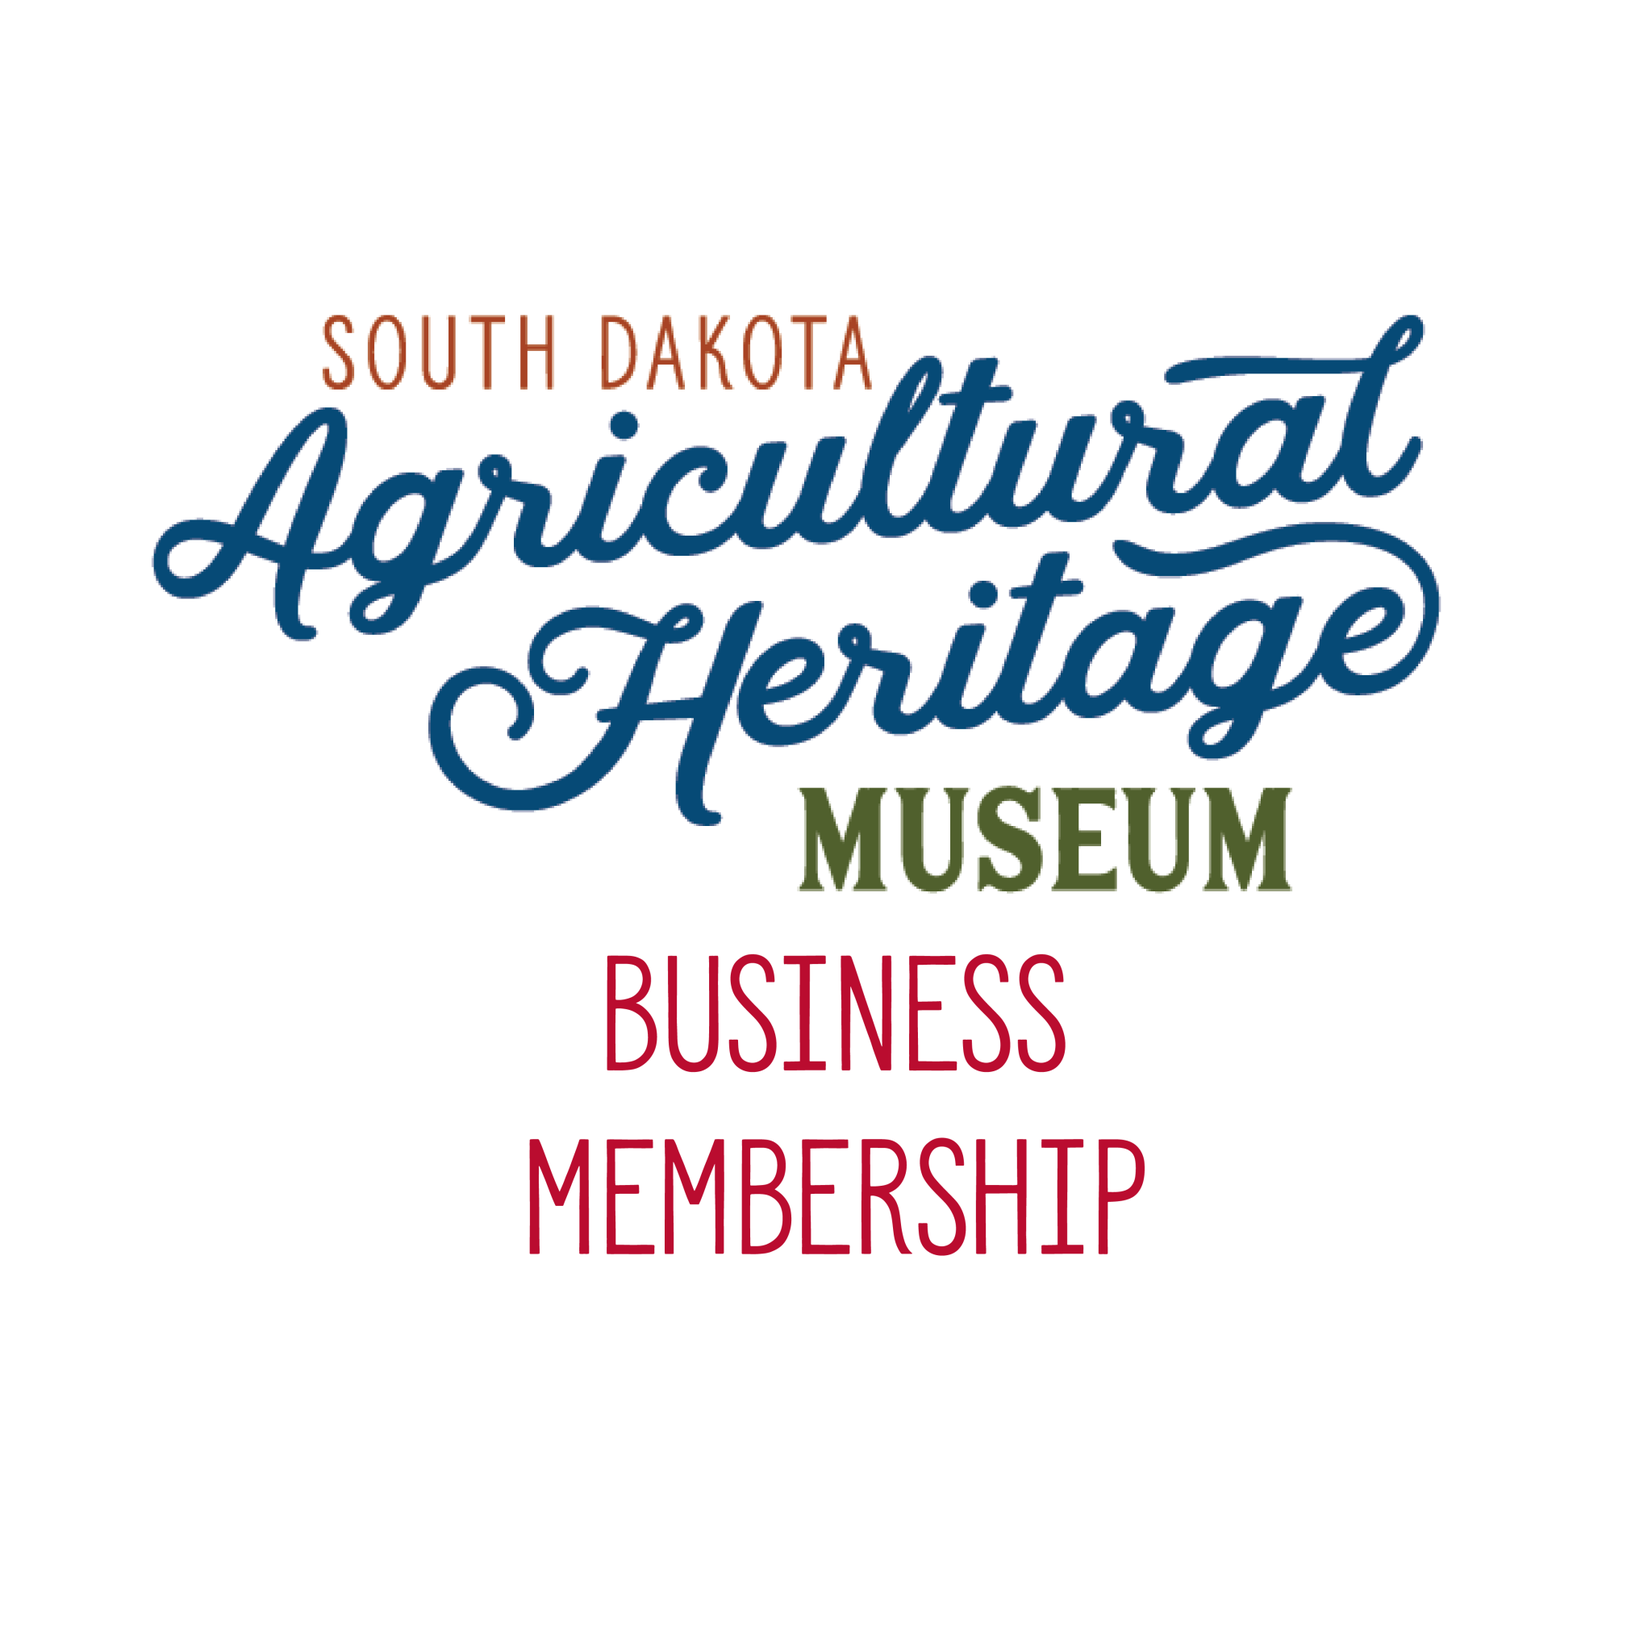 SD Agricultural Heritage Museum Business Membership